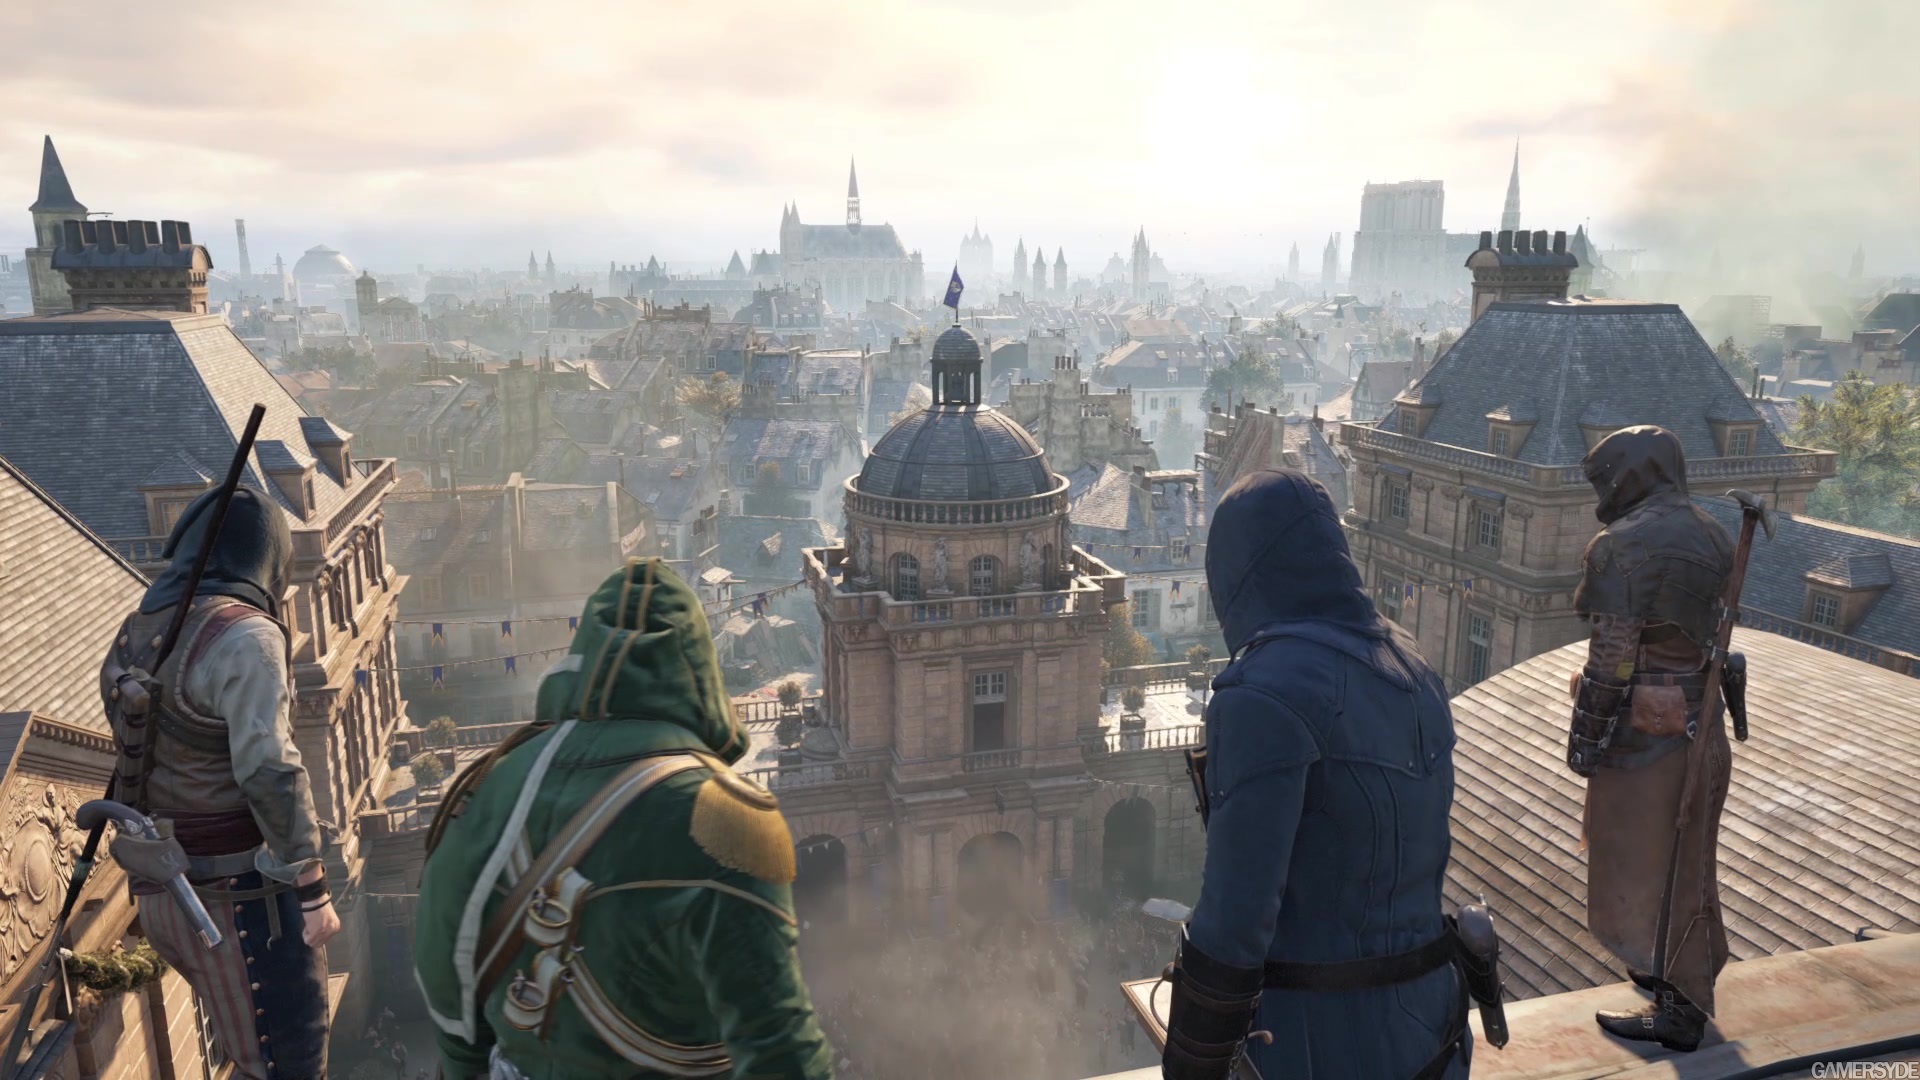 http://images.gamersyde.com/image_assassin_s_creed_unity-25265-2908_0029.jpg